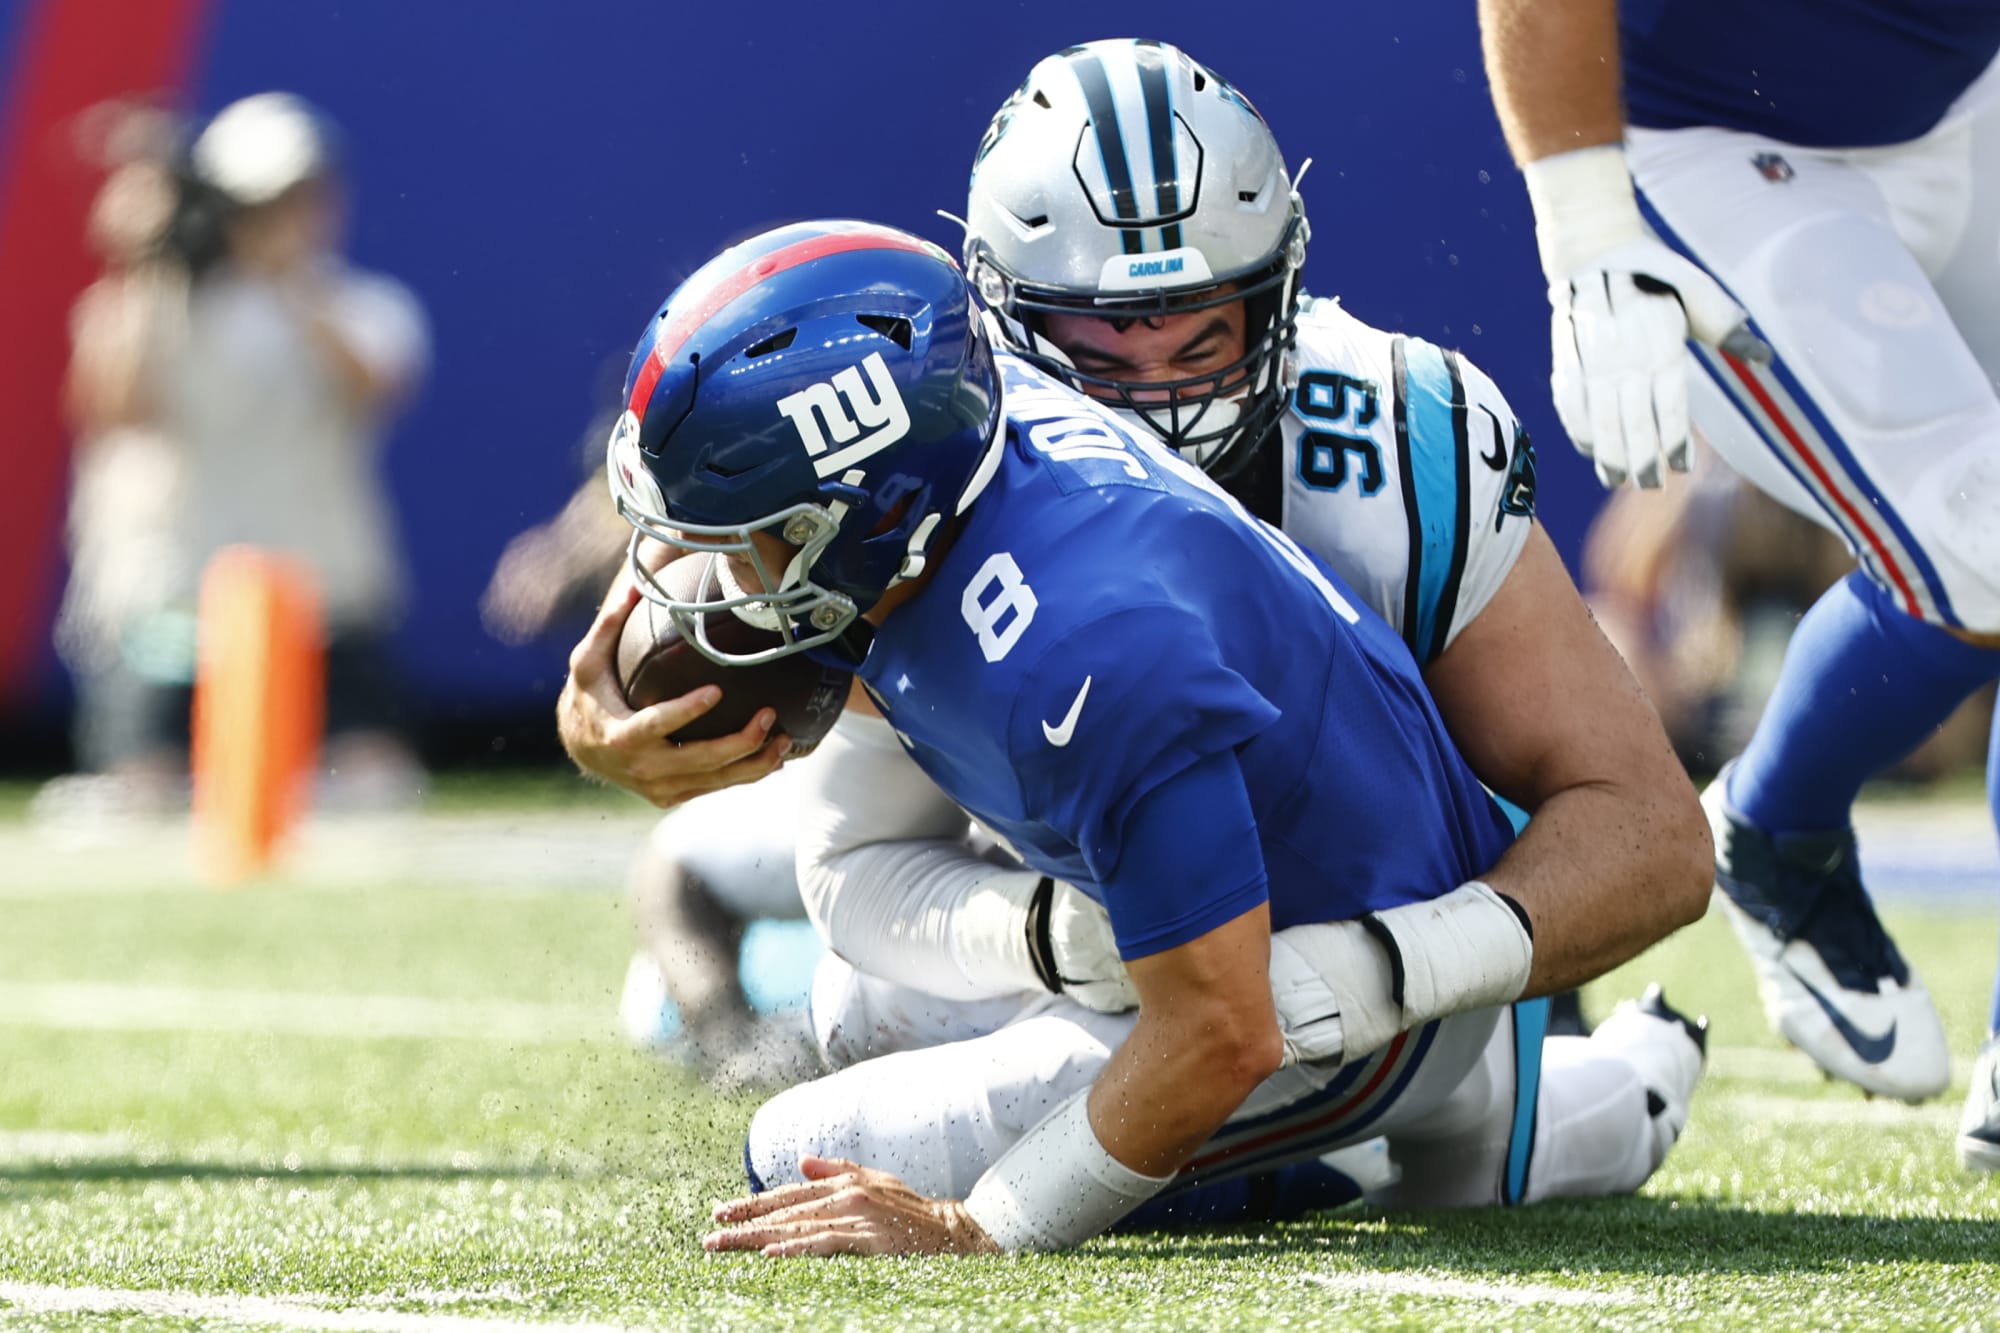 NFL Live highlights rough Daniel Jones plays from Week 2 and it’s tough to watch